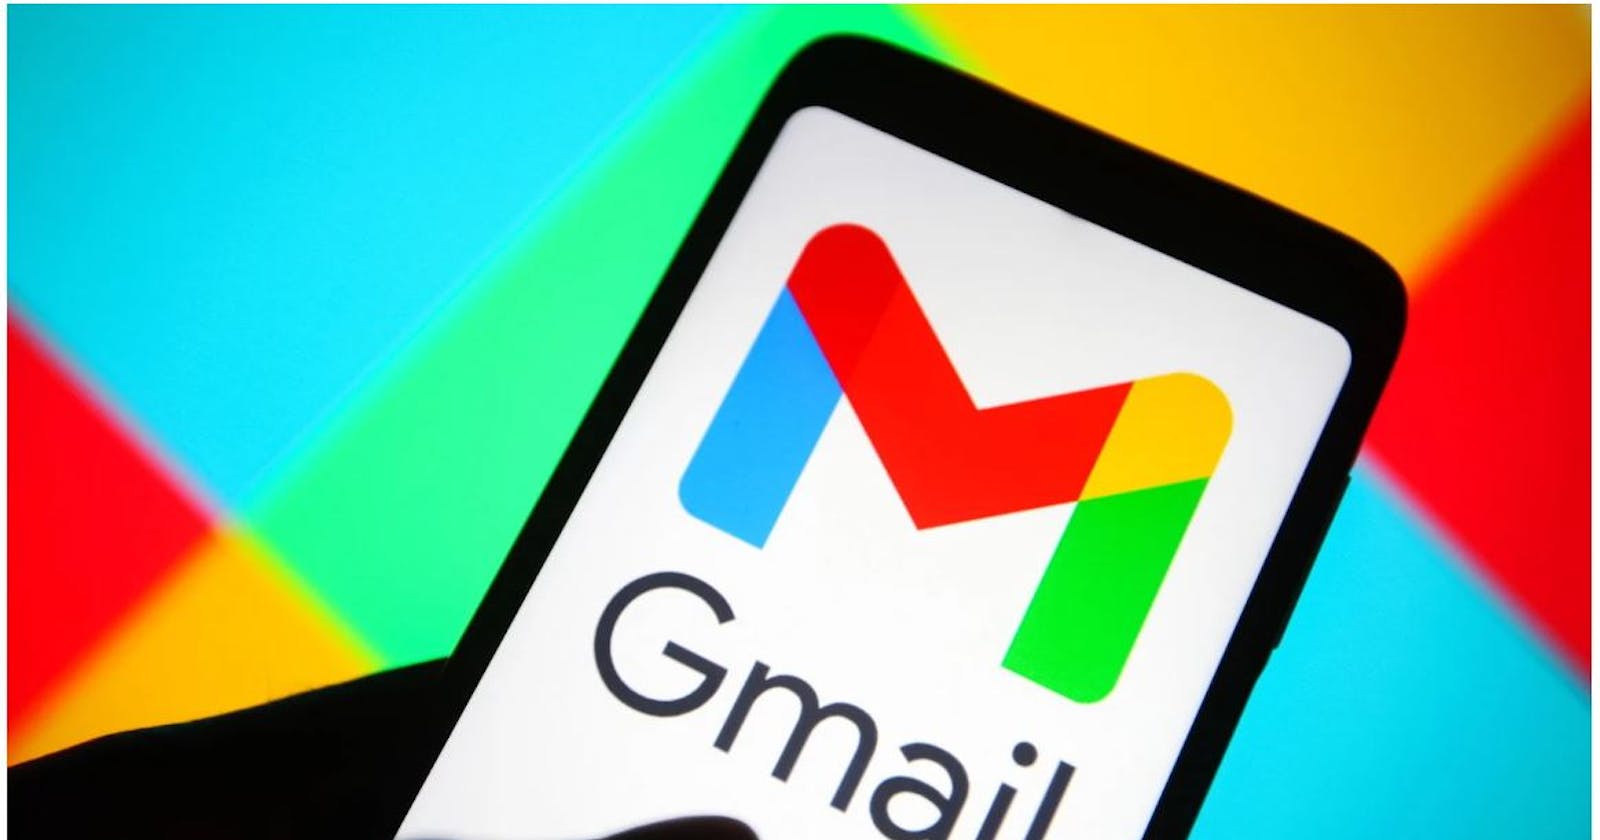 Blocking emails with new Gmail rules is a good thing.